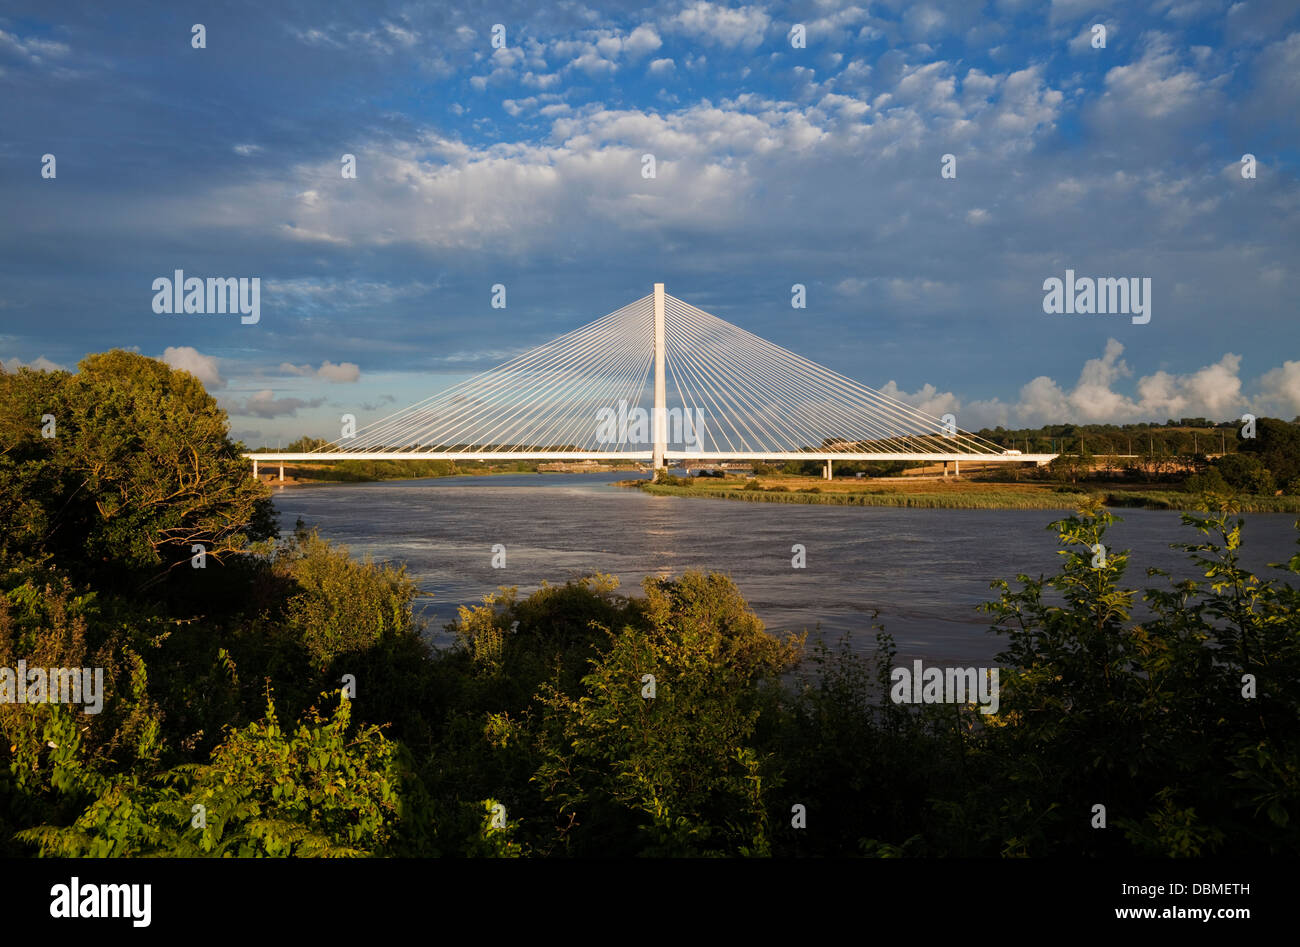 The River Suir and Bridge, a cable-stayed bridge built as an element of the N25 Waterford City Bypass, County Waterford, Ireland Stock Photo